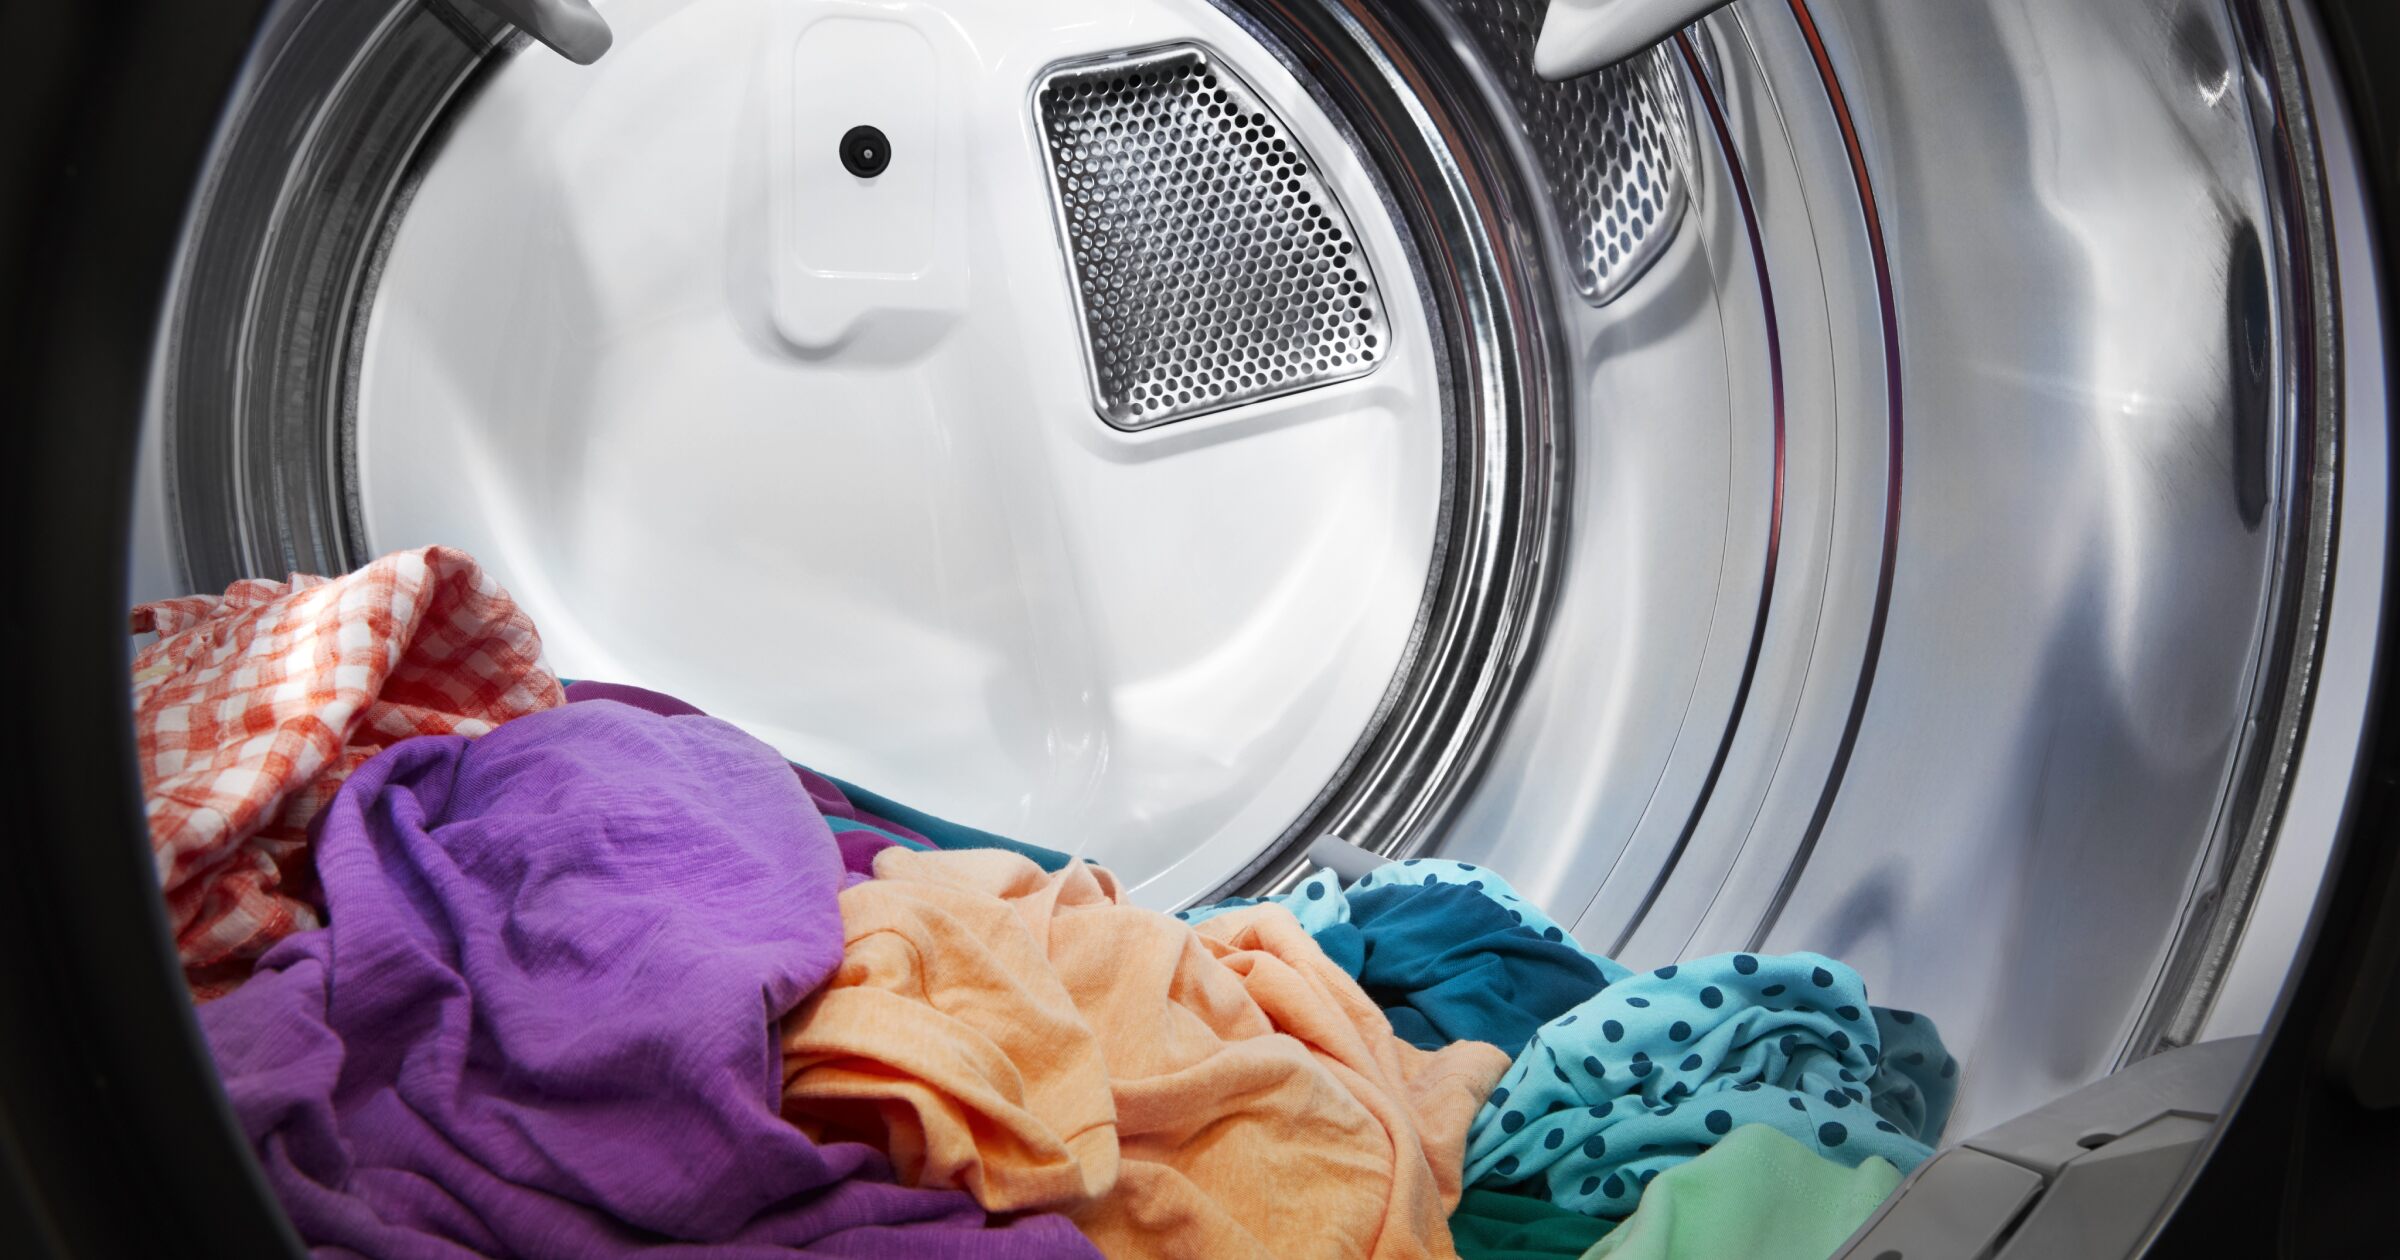 Tips For Troubleshooters On How To Maintain Samsung Dryers